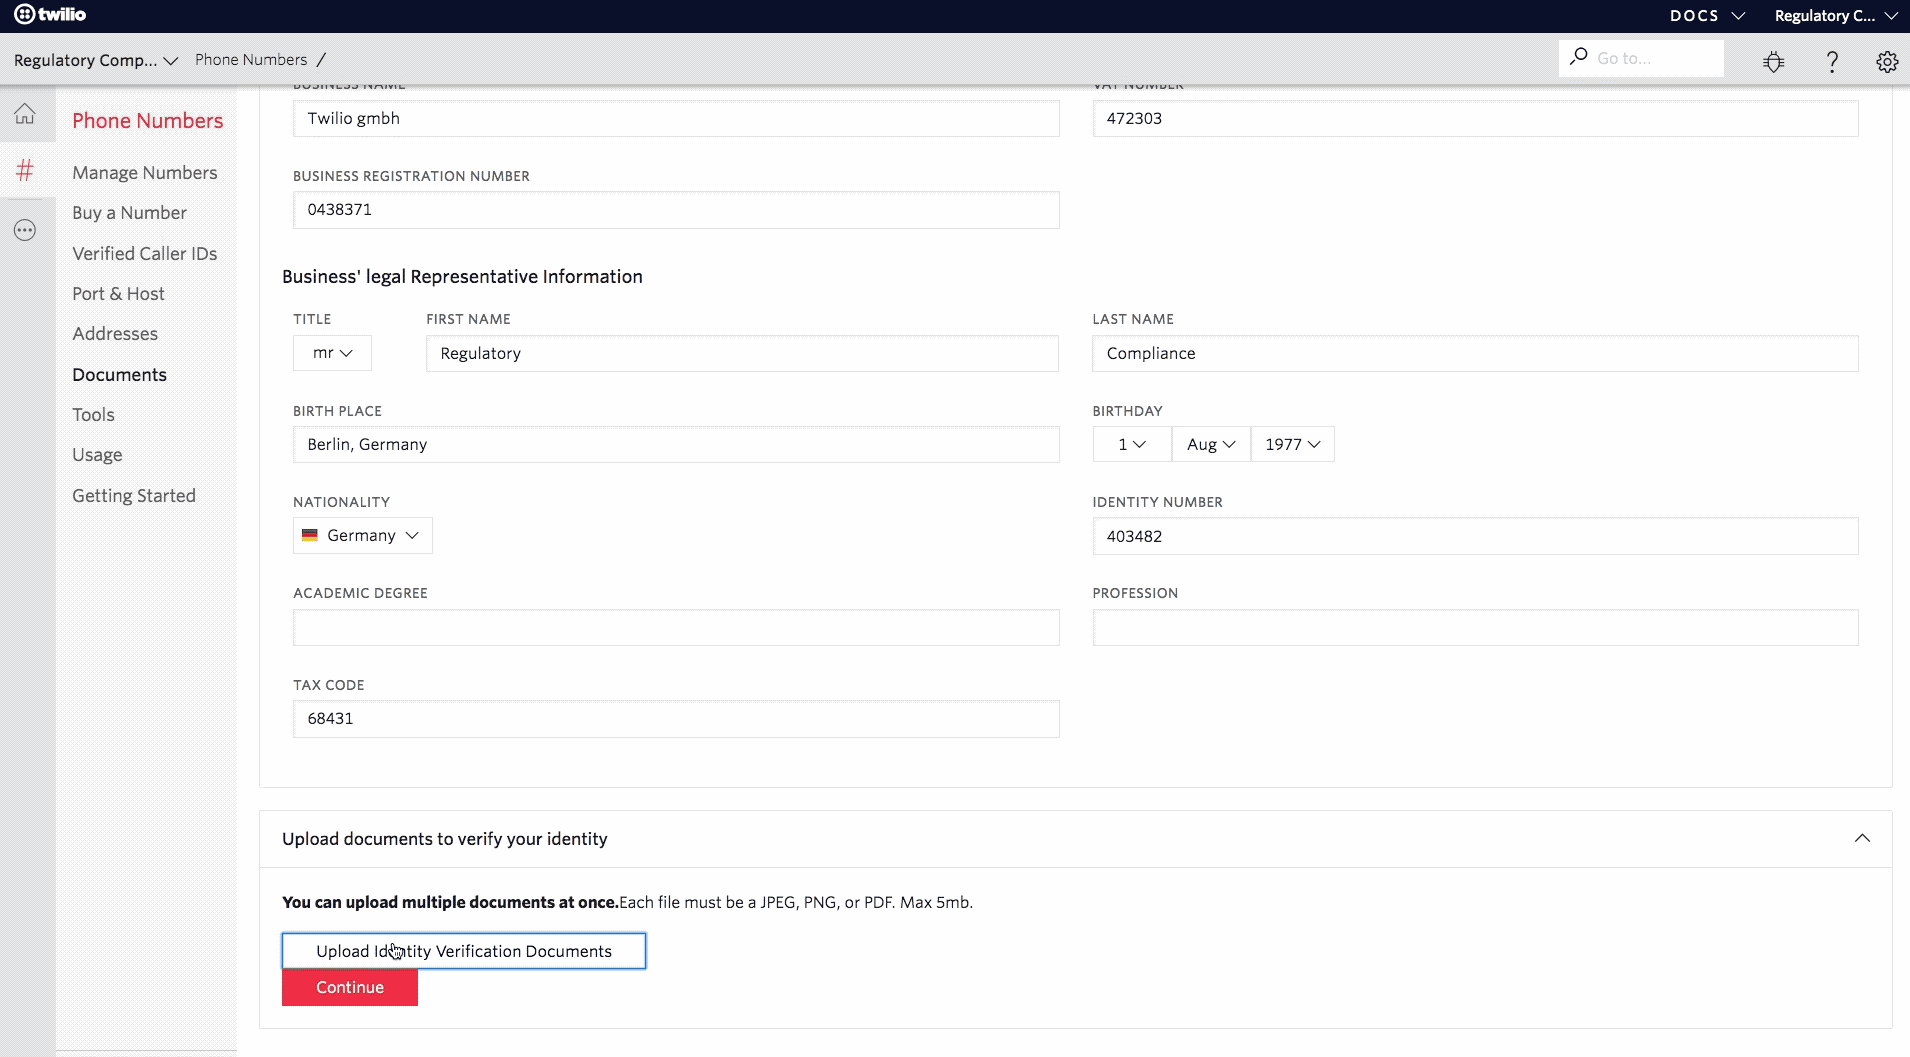 Uploading documents with the file selector